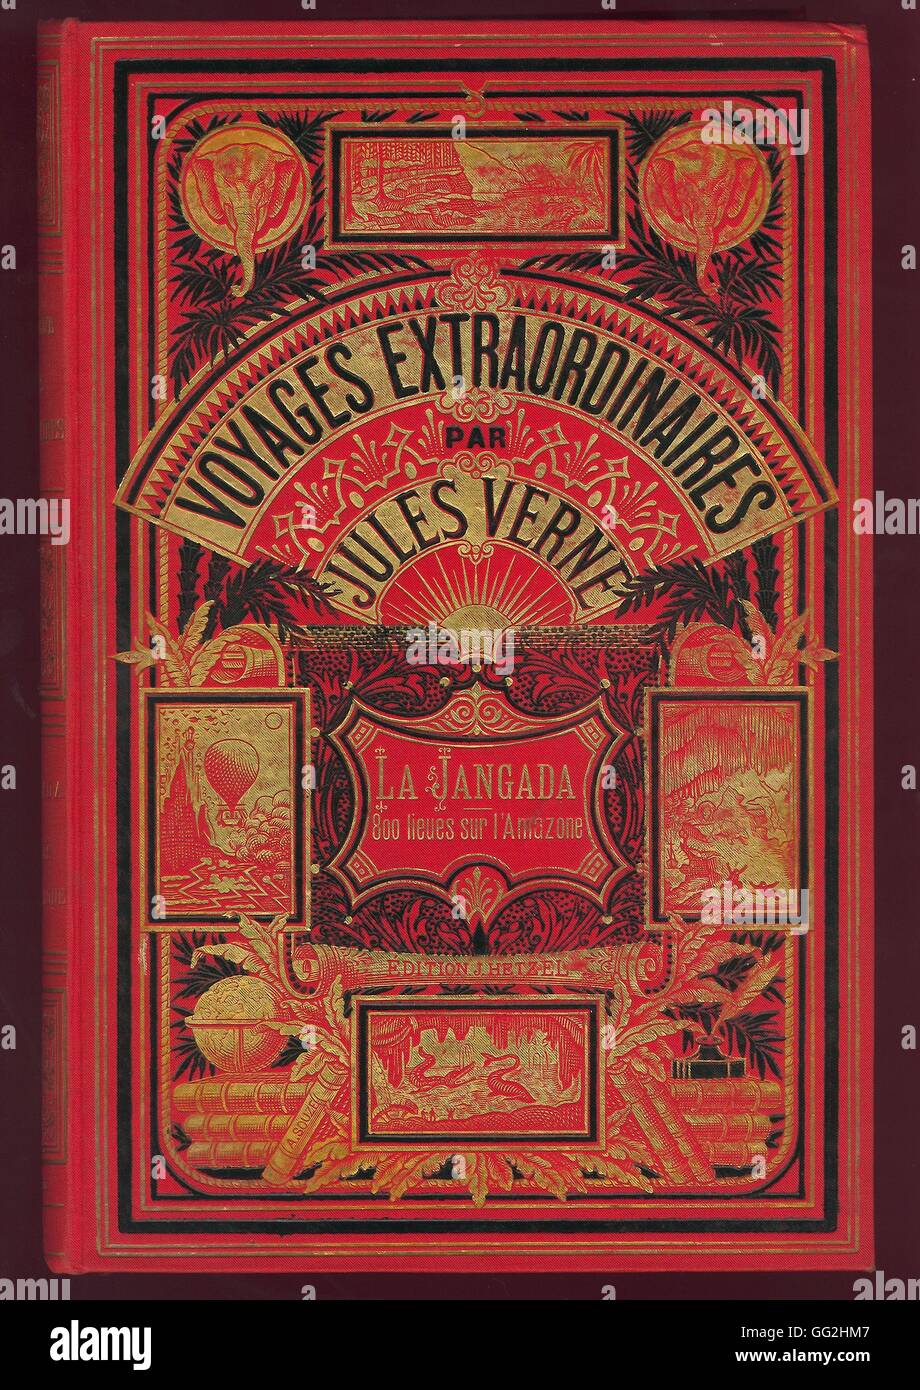 Book cover 800 miles on the Amazon Published as a serial novel, 1881 Les Voyages Extraordinaires, Jules Verne Edition Hetzel Stock Photo